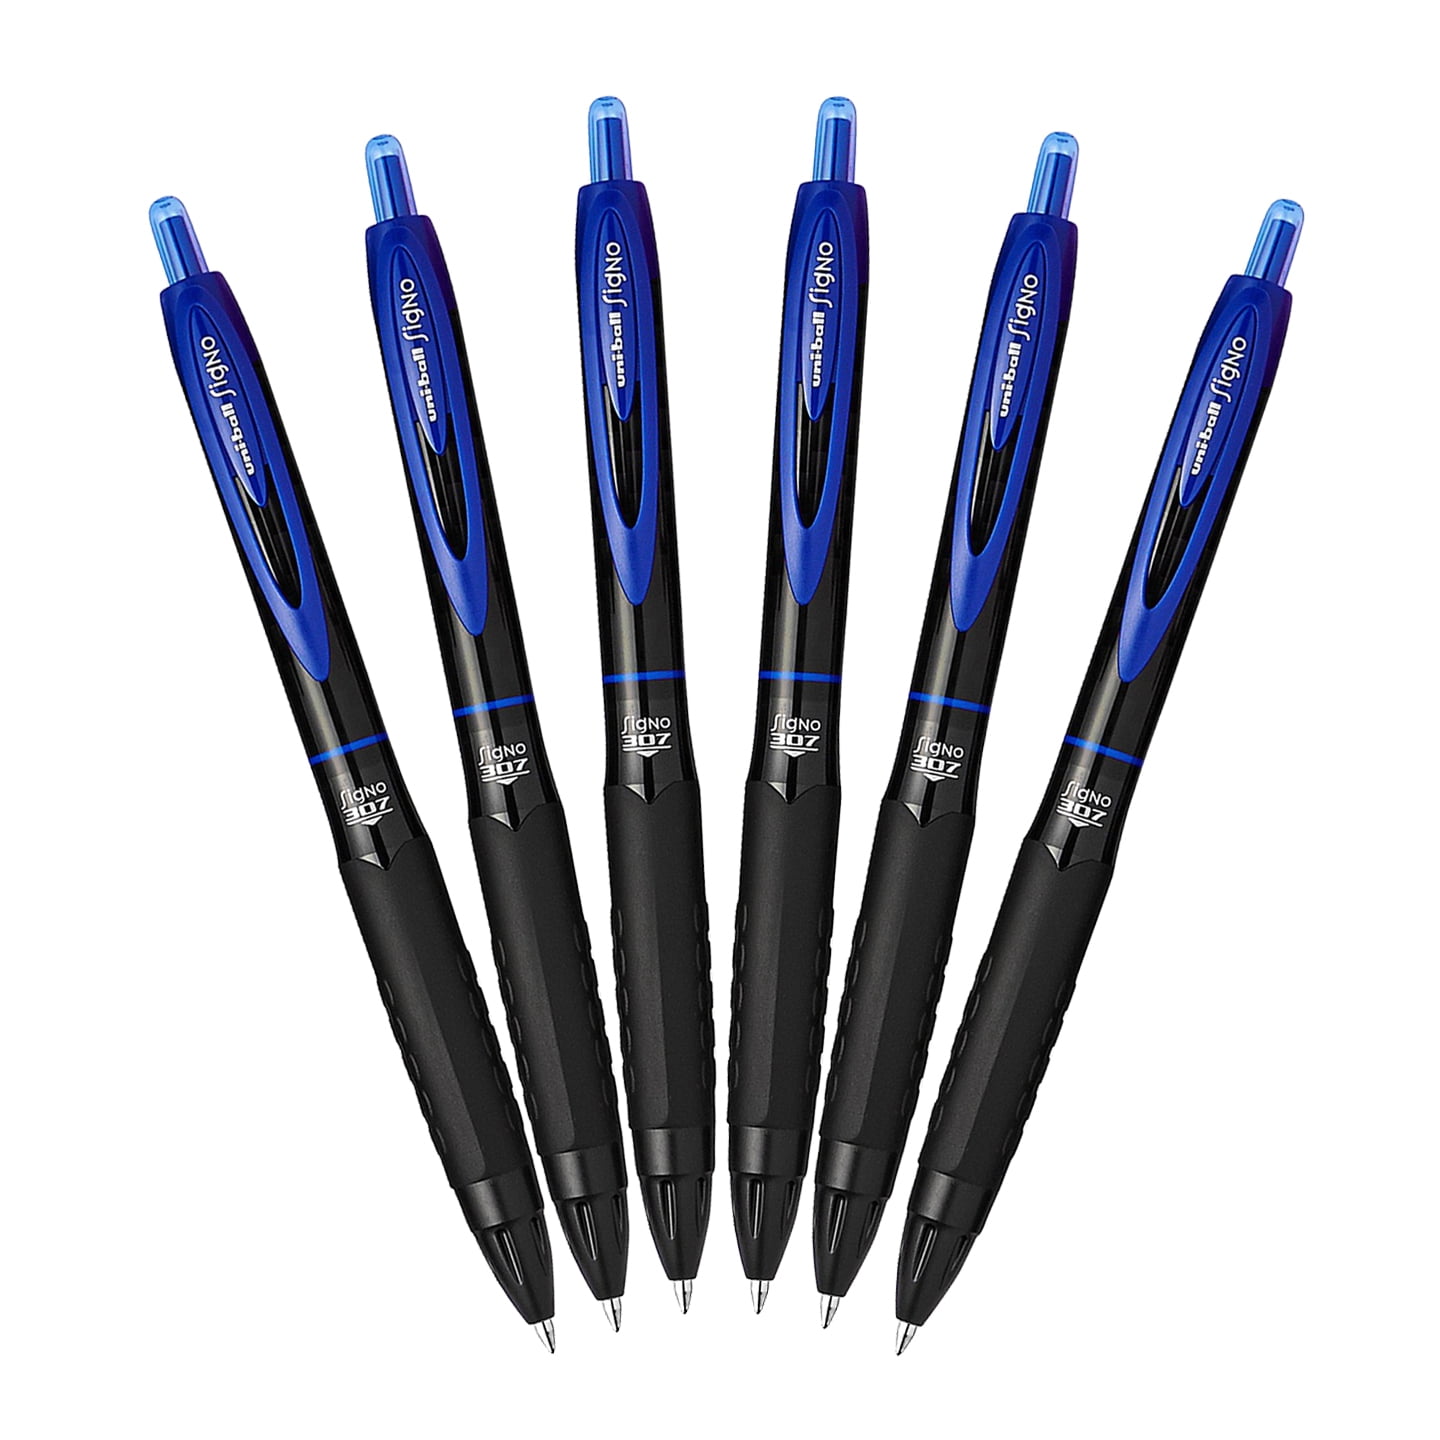 Uniball One Gel Pen 5 Pack, 0.7mm Medium Assorted Pens, Gel Ink Pens   Office Supplies Sold by Uniball are Pens, Ballpoint Pen, Colored Pens, Gel  Pens, Fine Point, Smooth Writing Pens 